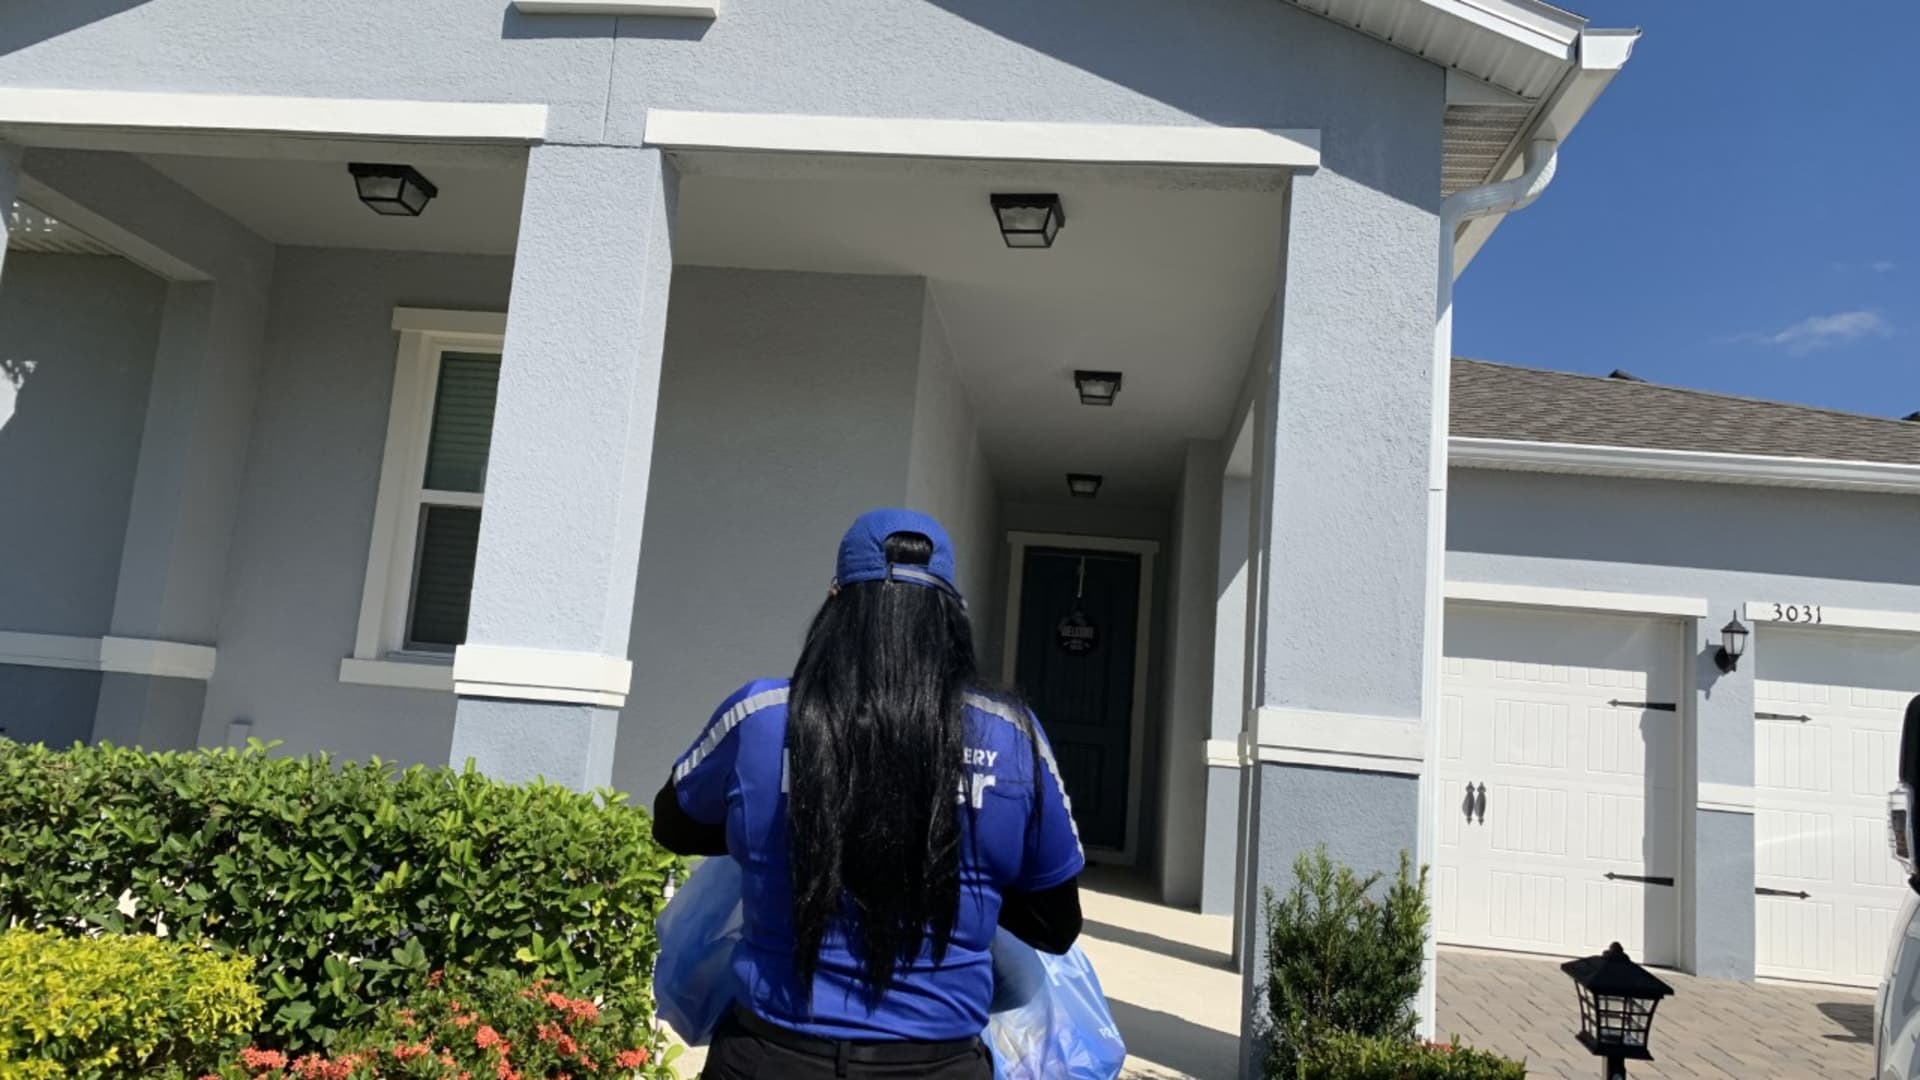 Latoya Thornton is one of about 500 drivers across Florida who drop off groceries for Kroger Delivery. Some customers are homebound seniors and others are just looking to save time.